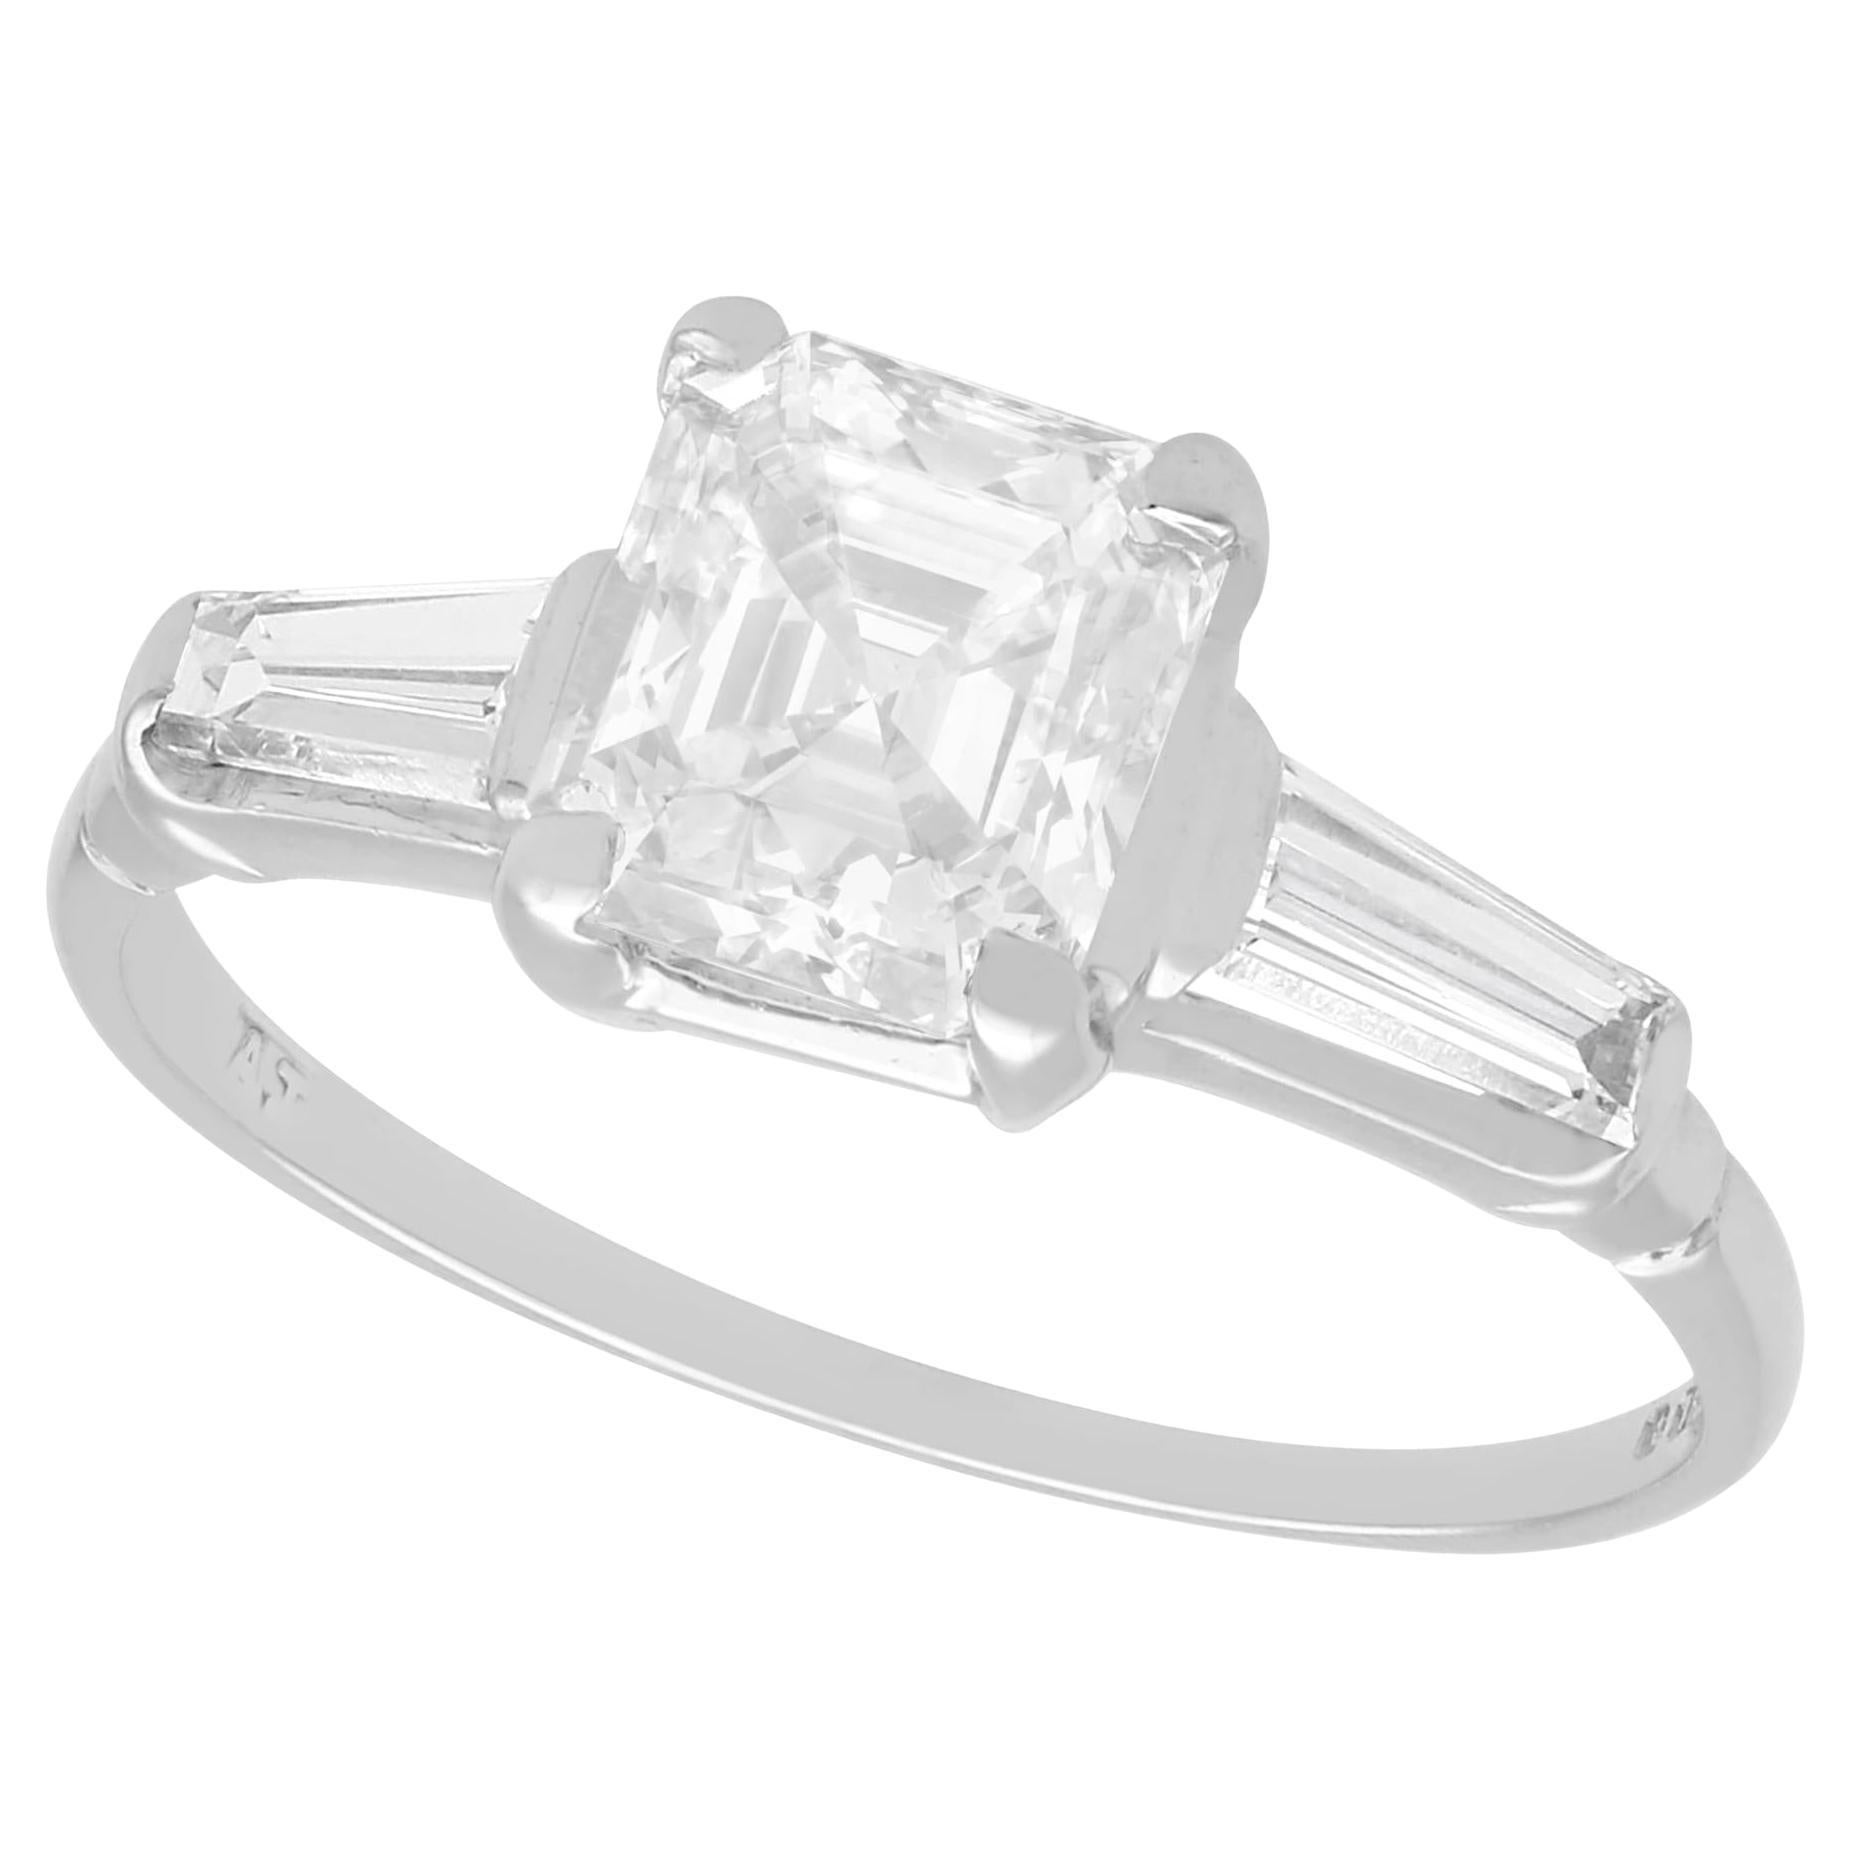 Vintage 1.75 Carat Asscher cut Diamond Solitaire Ring in White Gold  For Sale